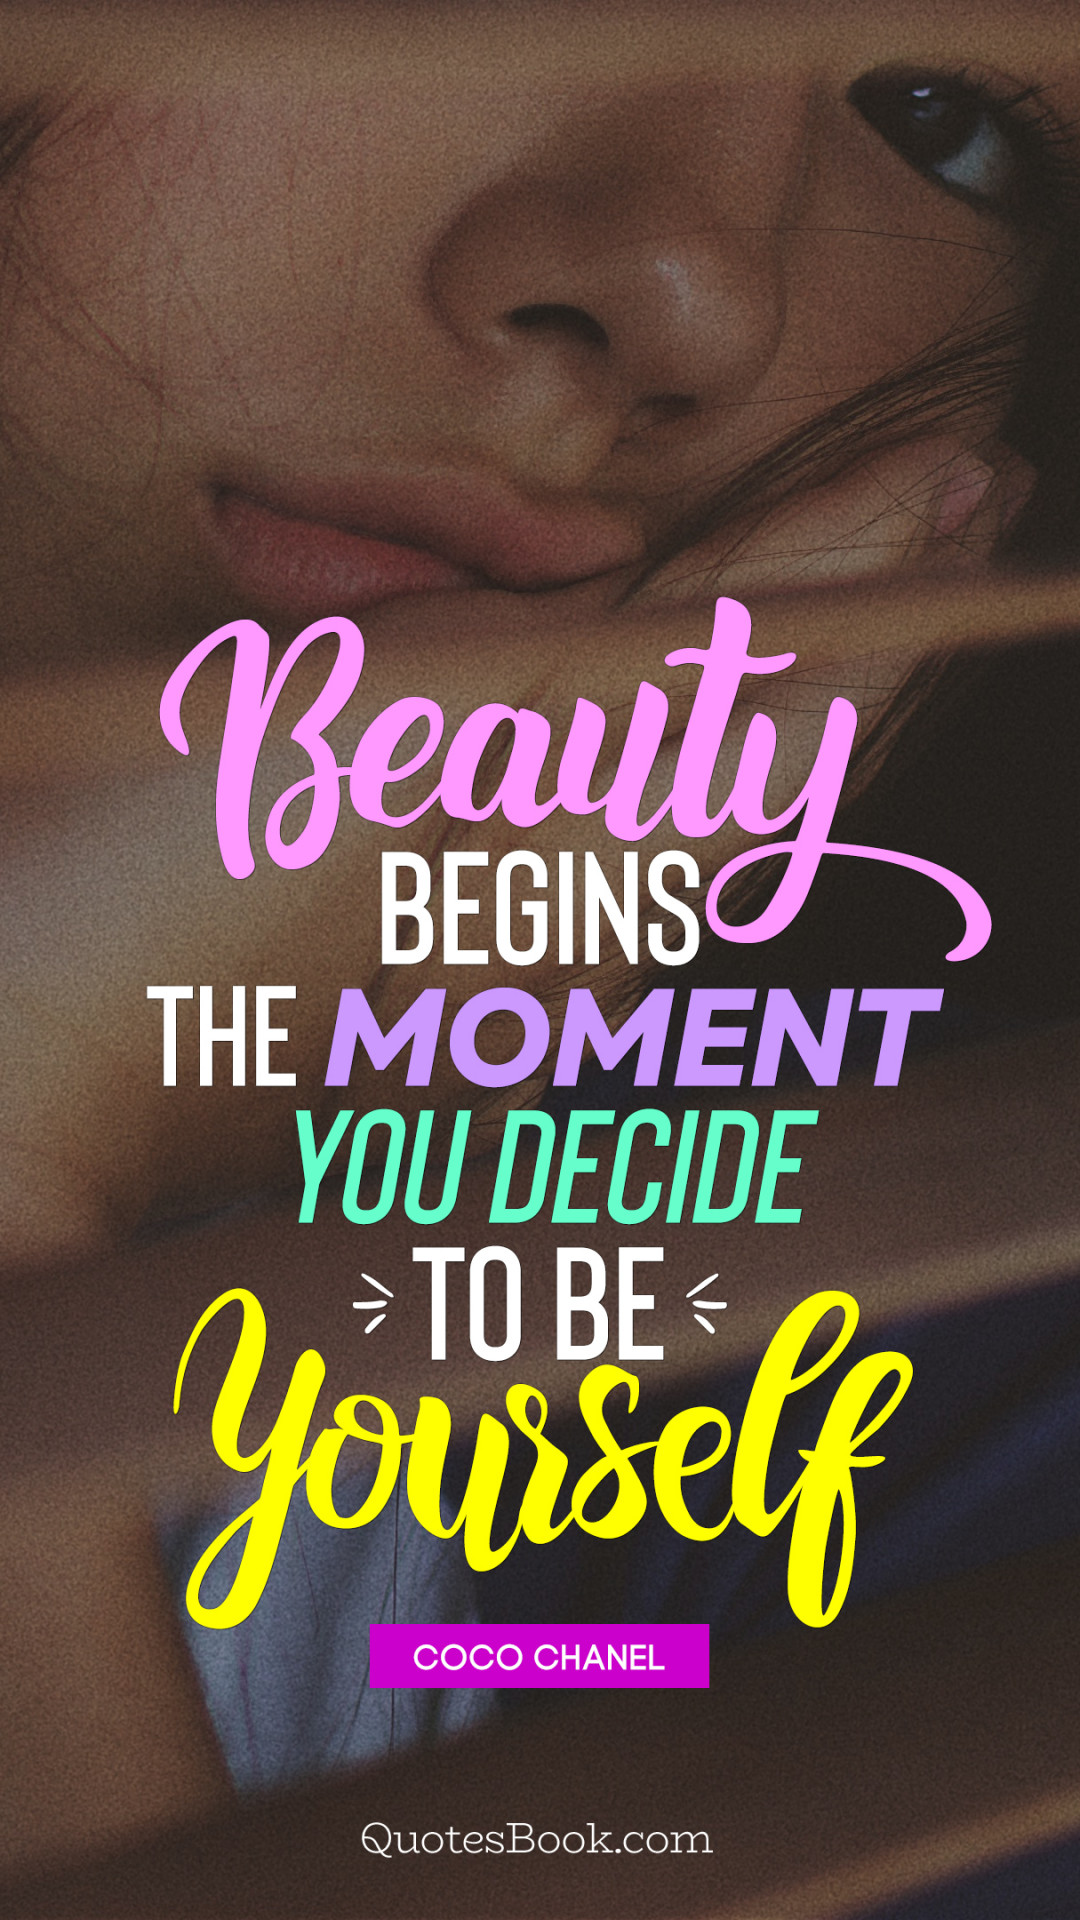 Beauty begins the moment you decide to be yourself. - Quote by Coco Chanel  - QuotesBook